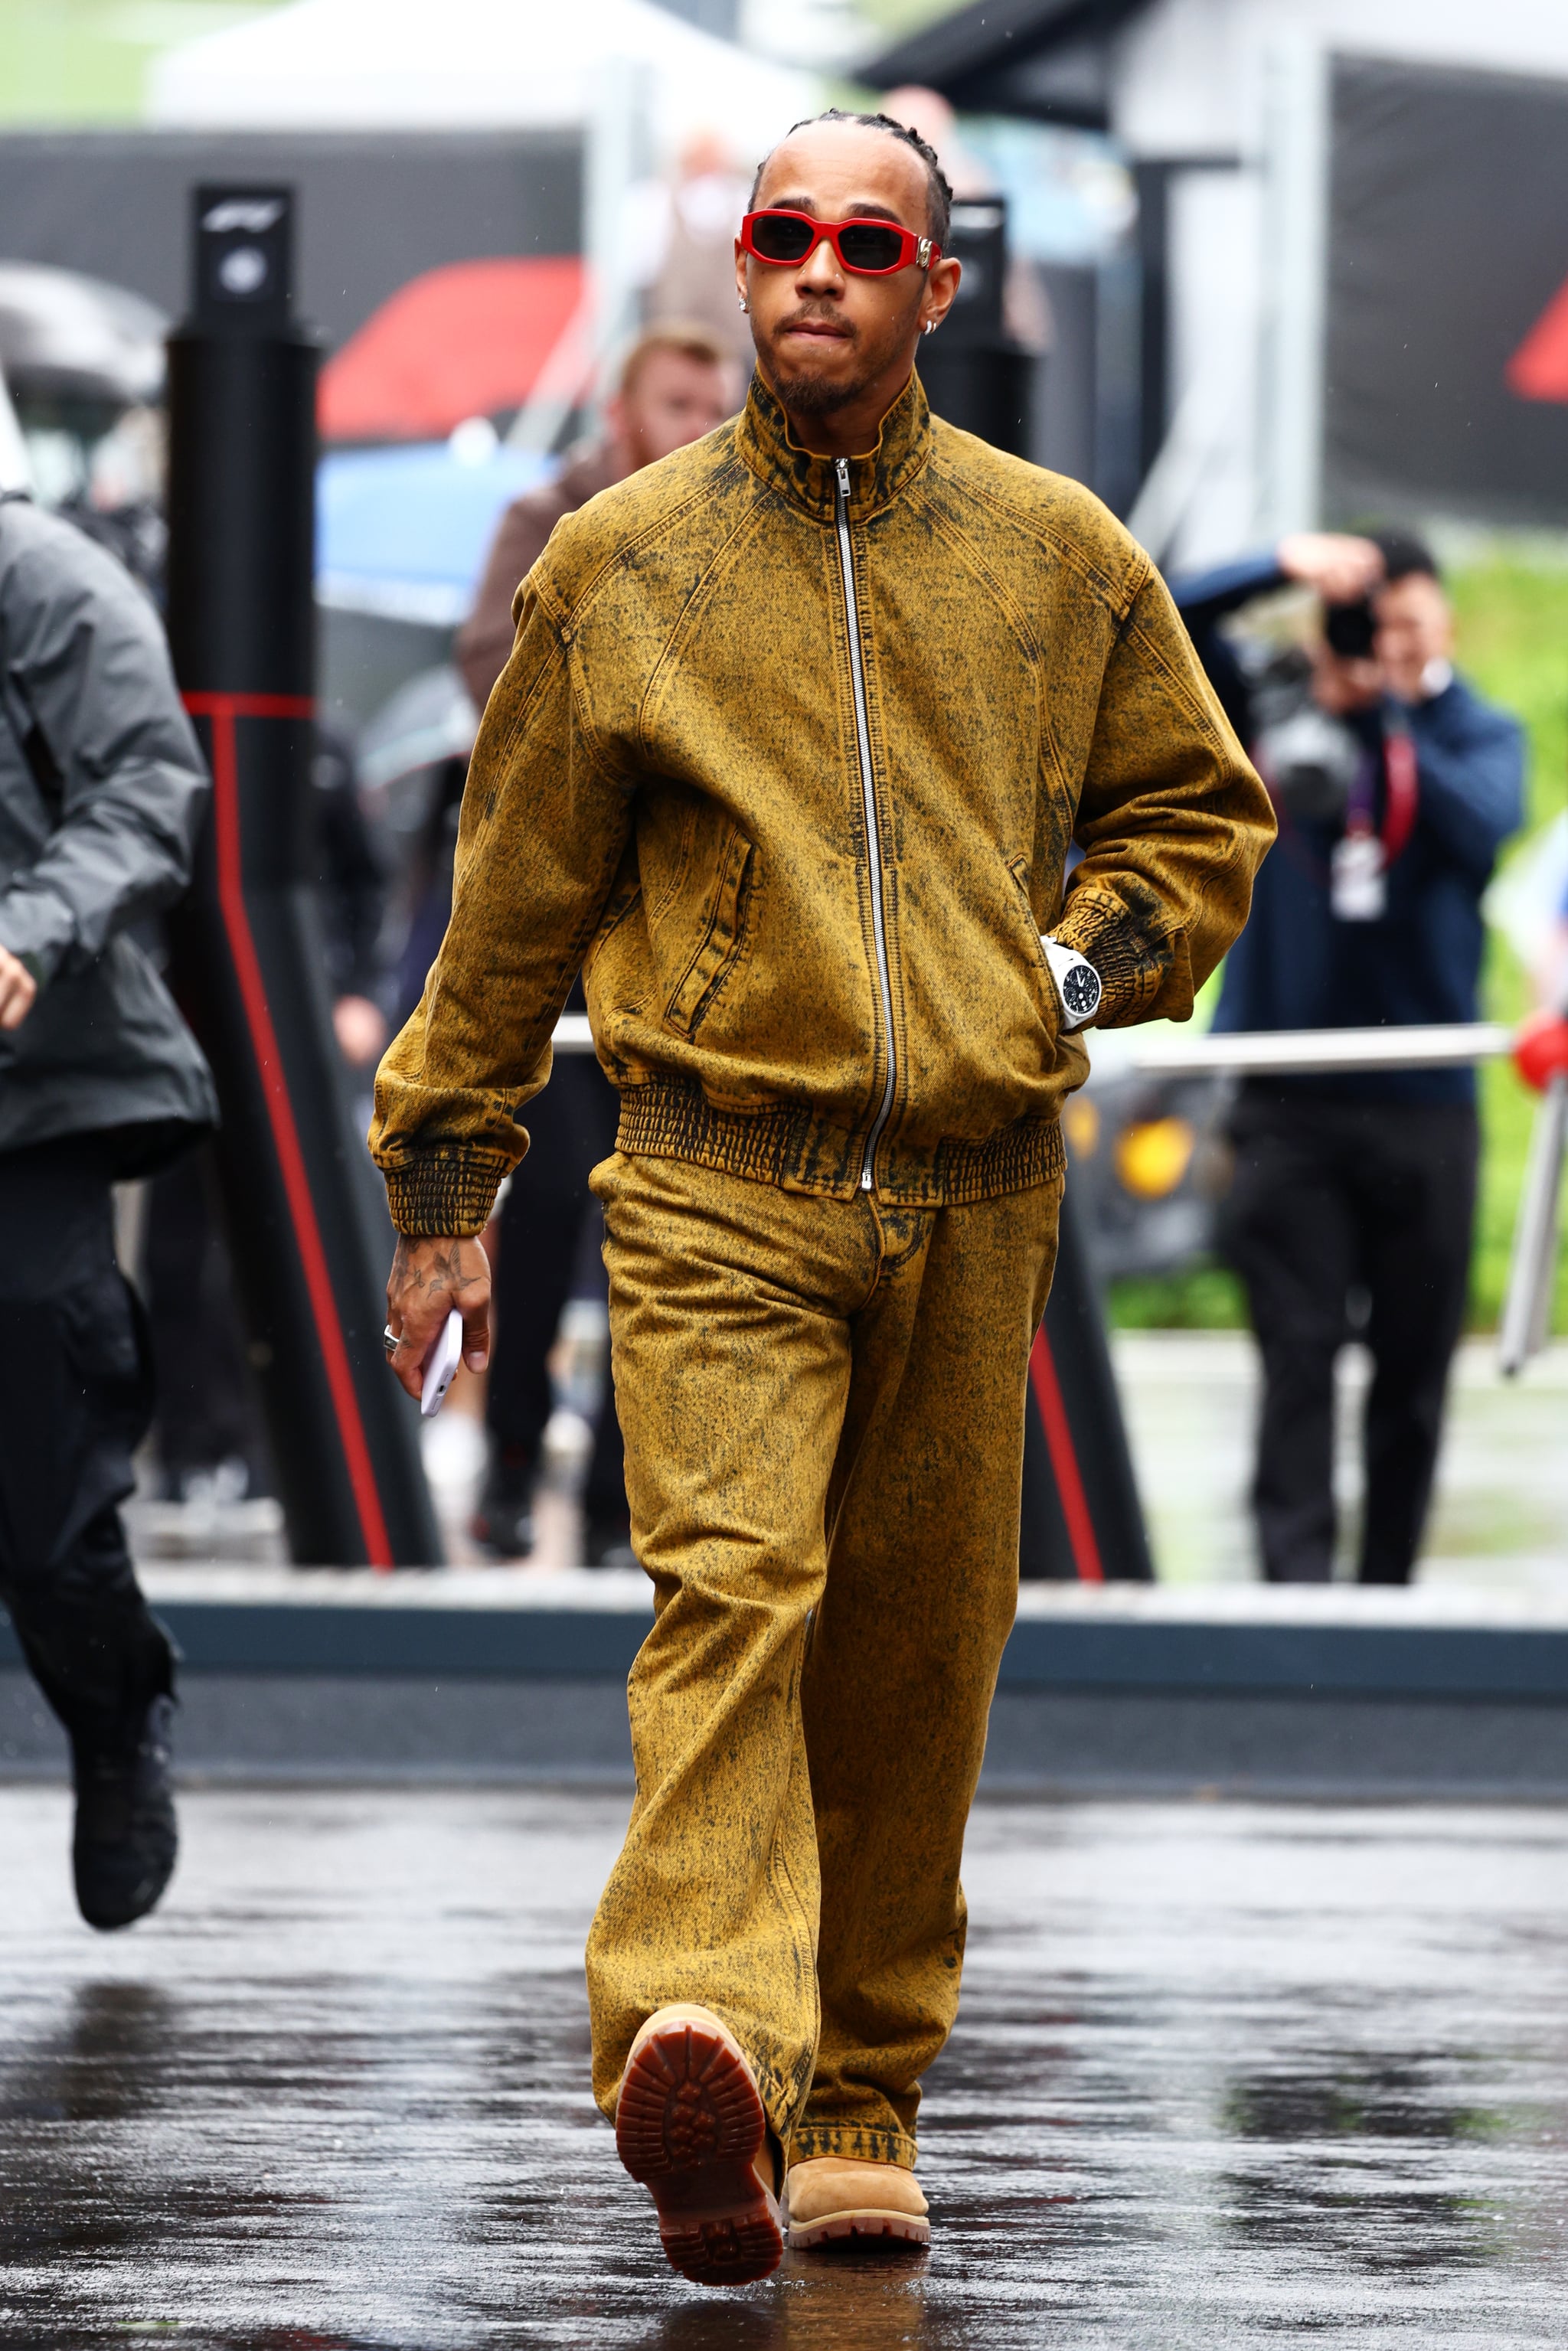 Lewis Hamilton's outfit 30.04.2023 in 2023